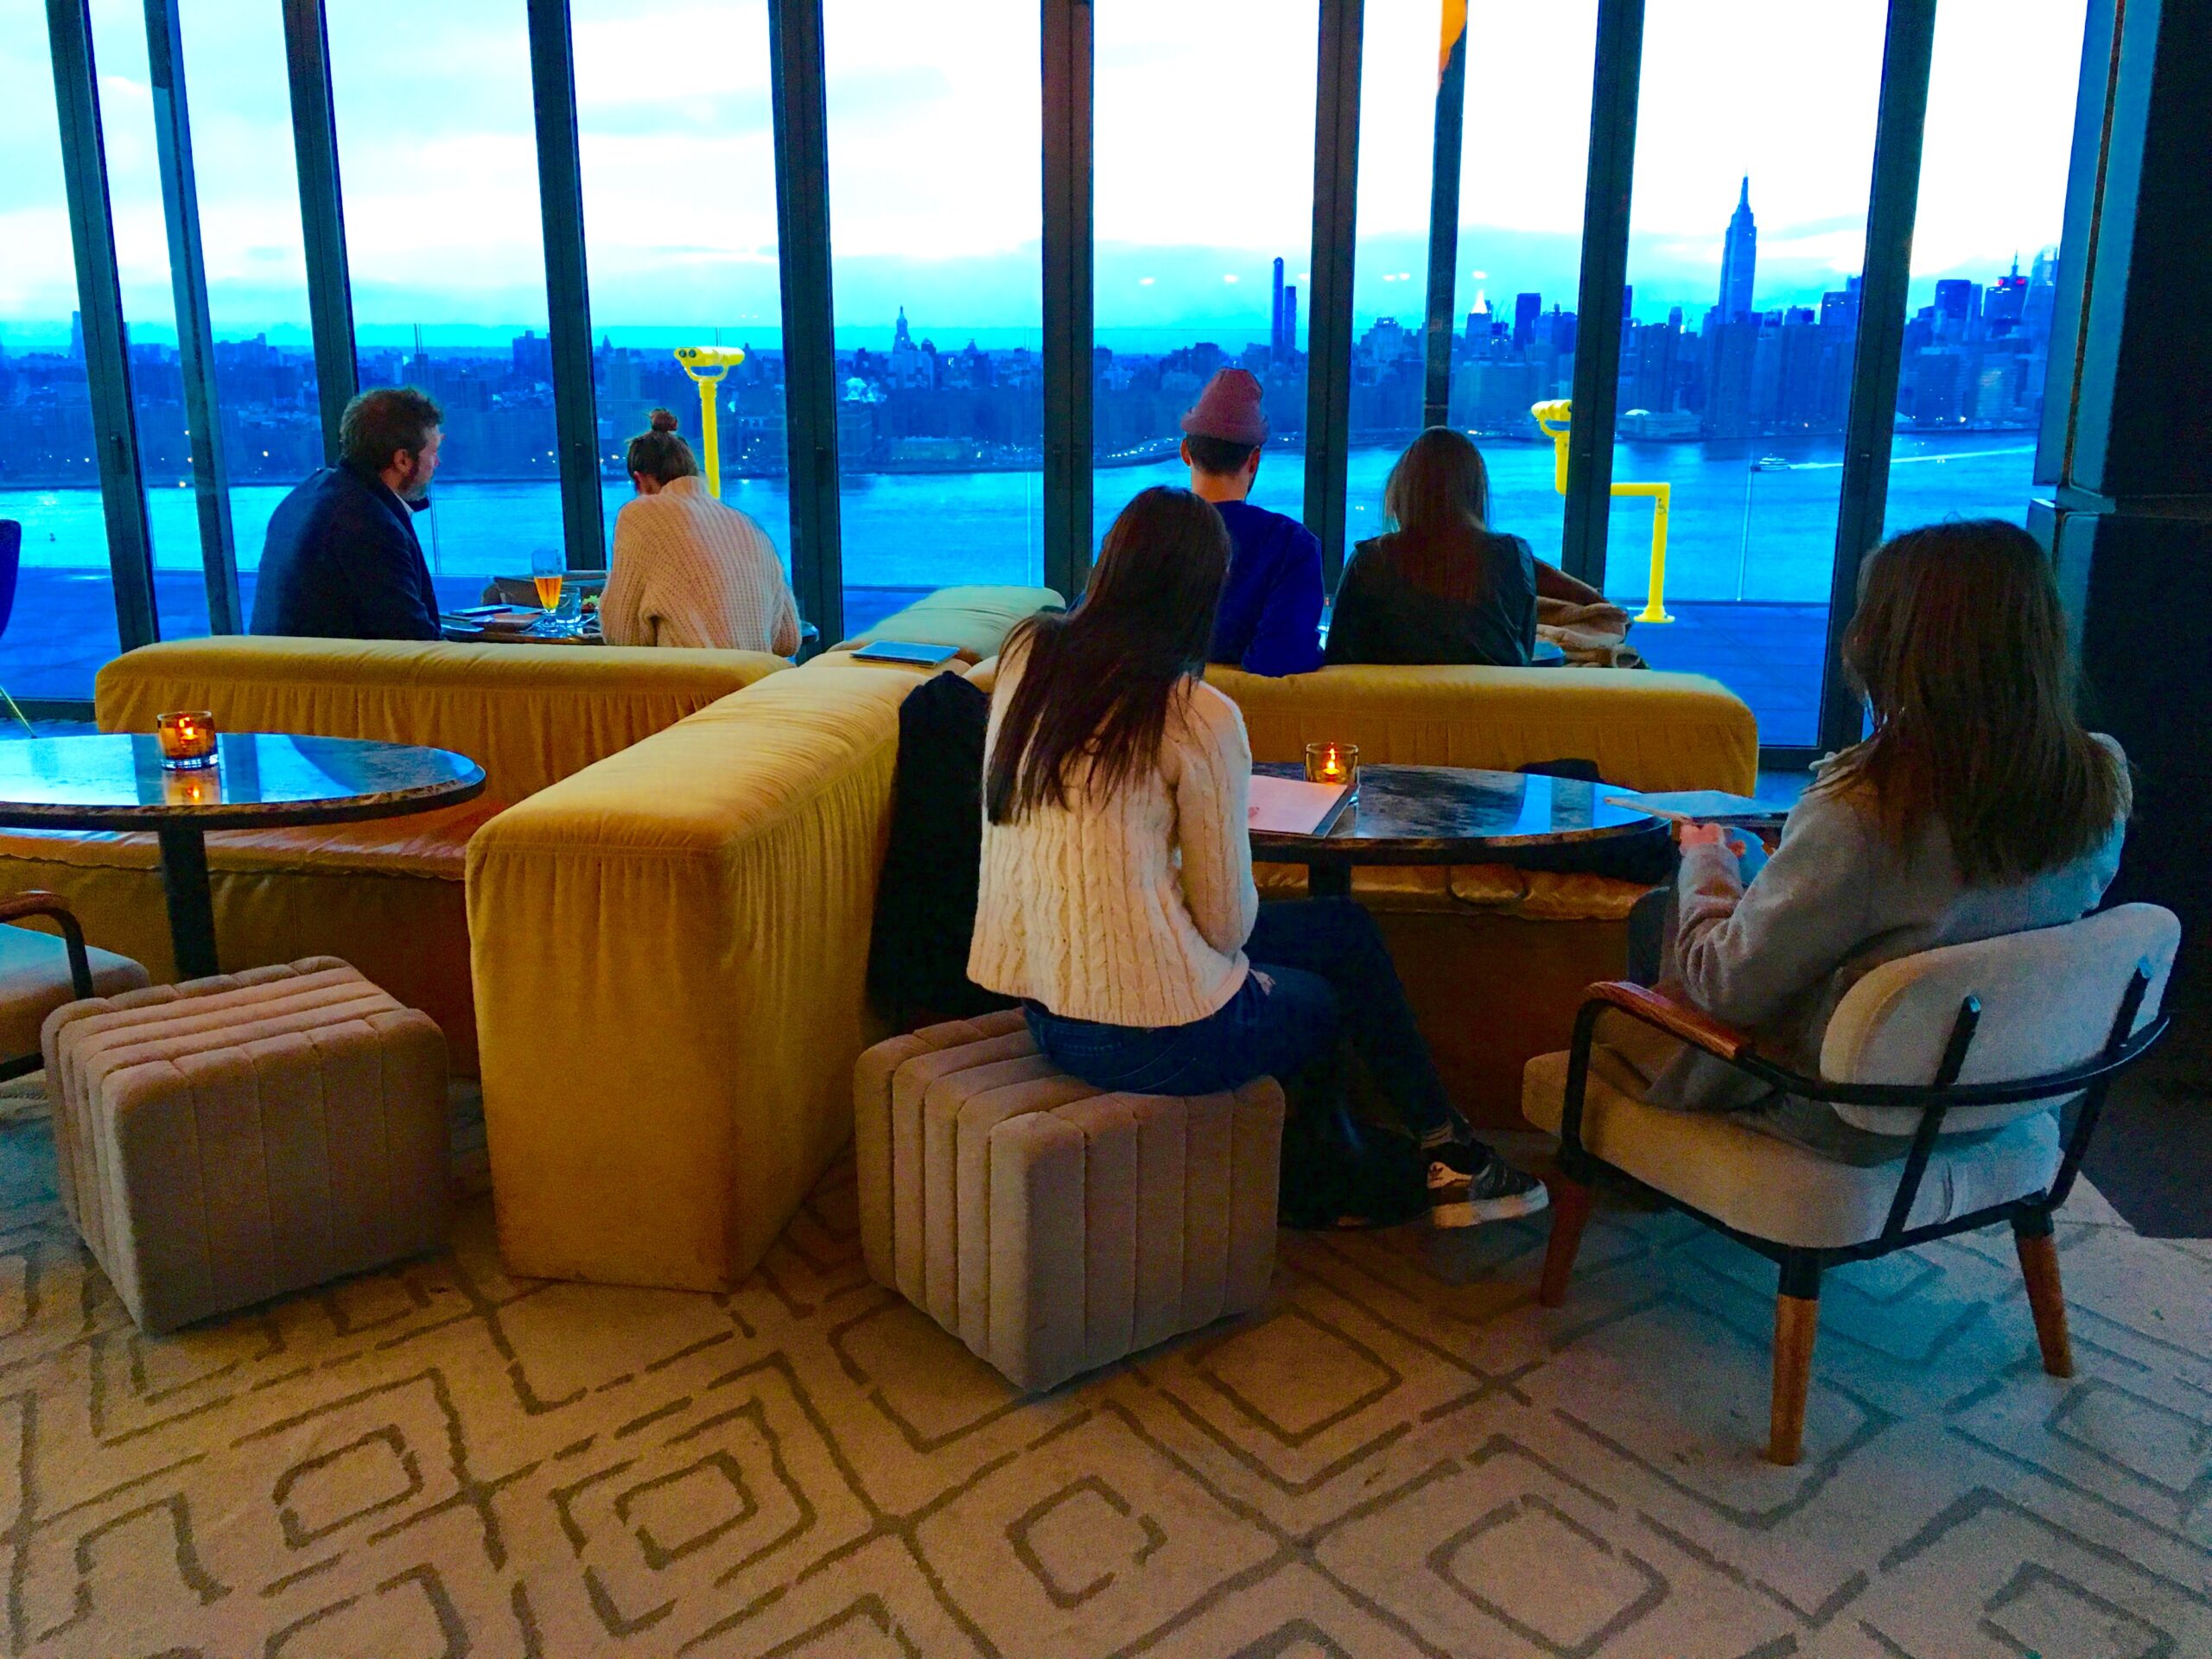 The William Vale’s rooftop bar has floor-to-ceiling windows so you can really take in the views. Photo: Lore Croghan/Brooklyn Eagle